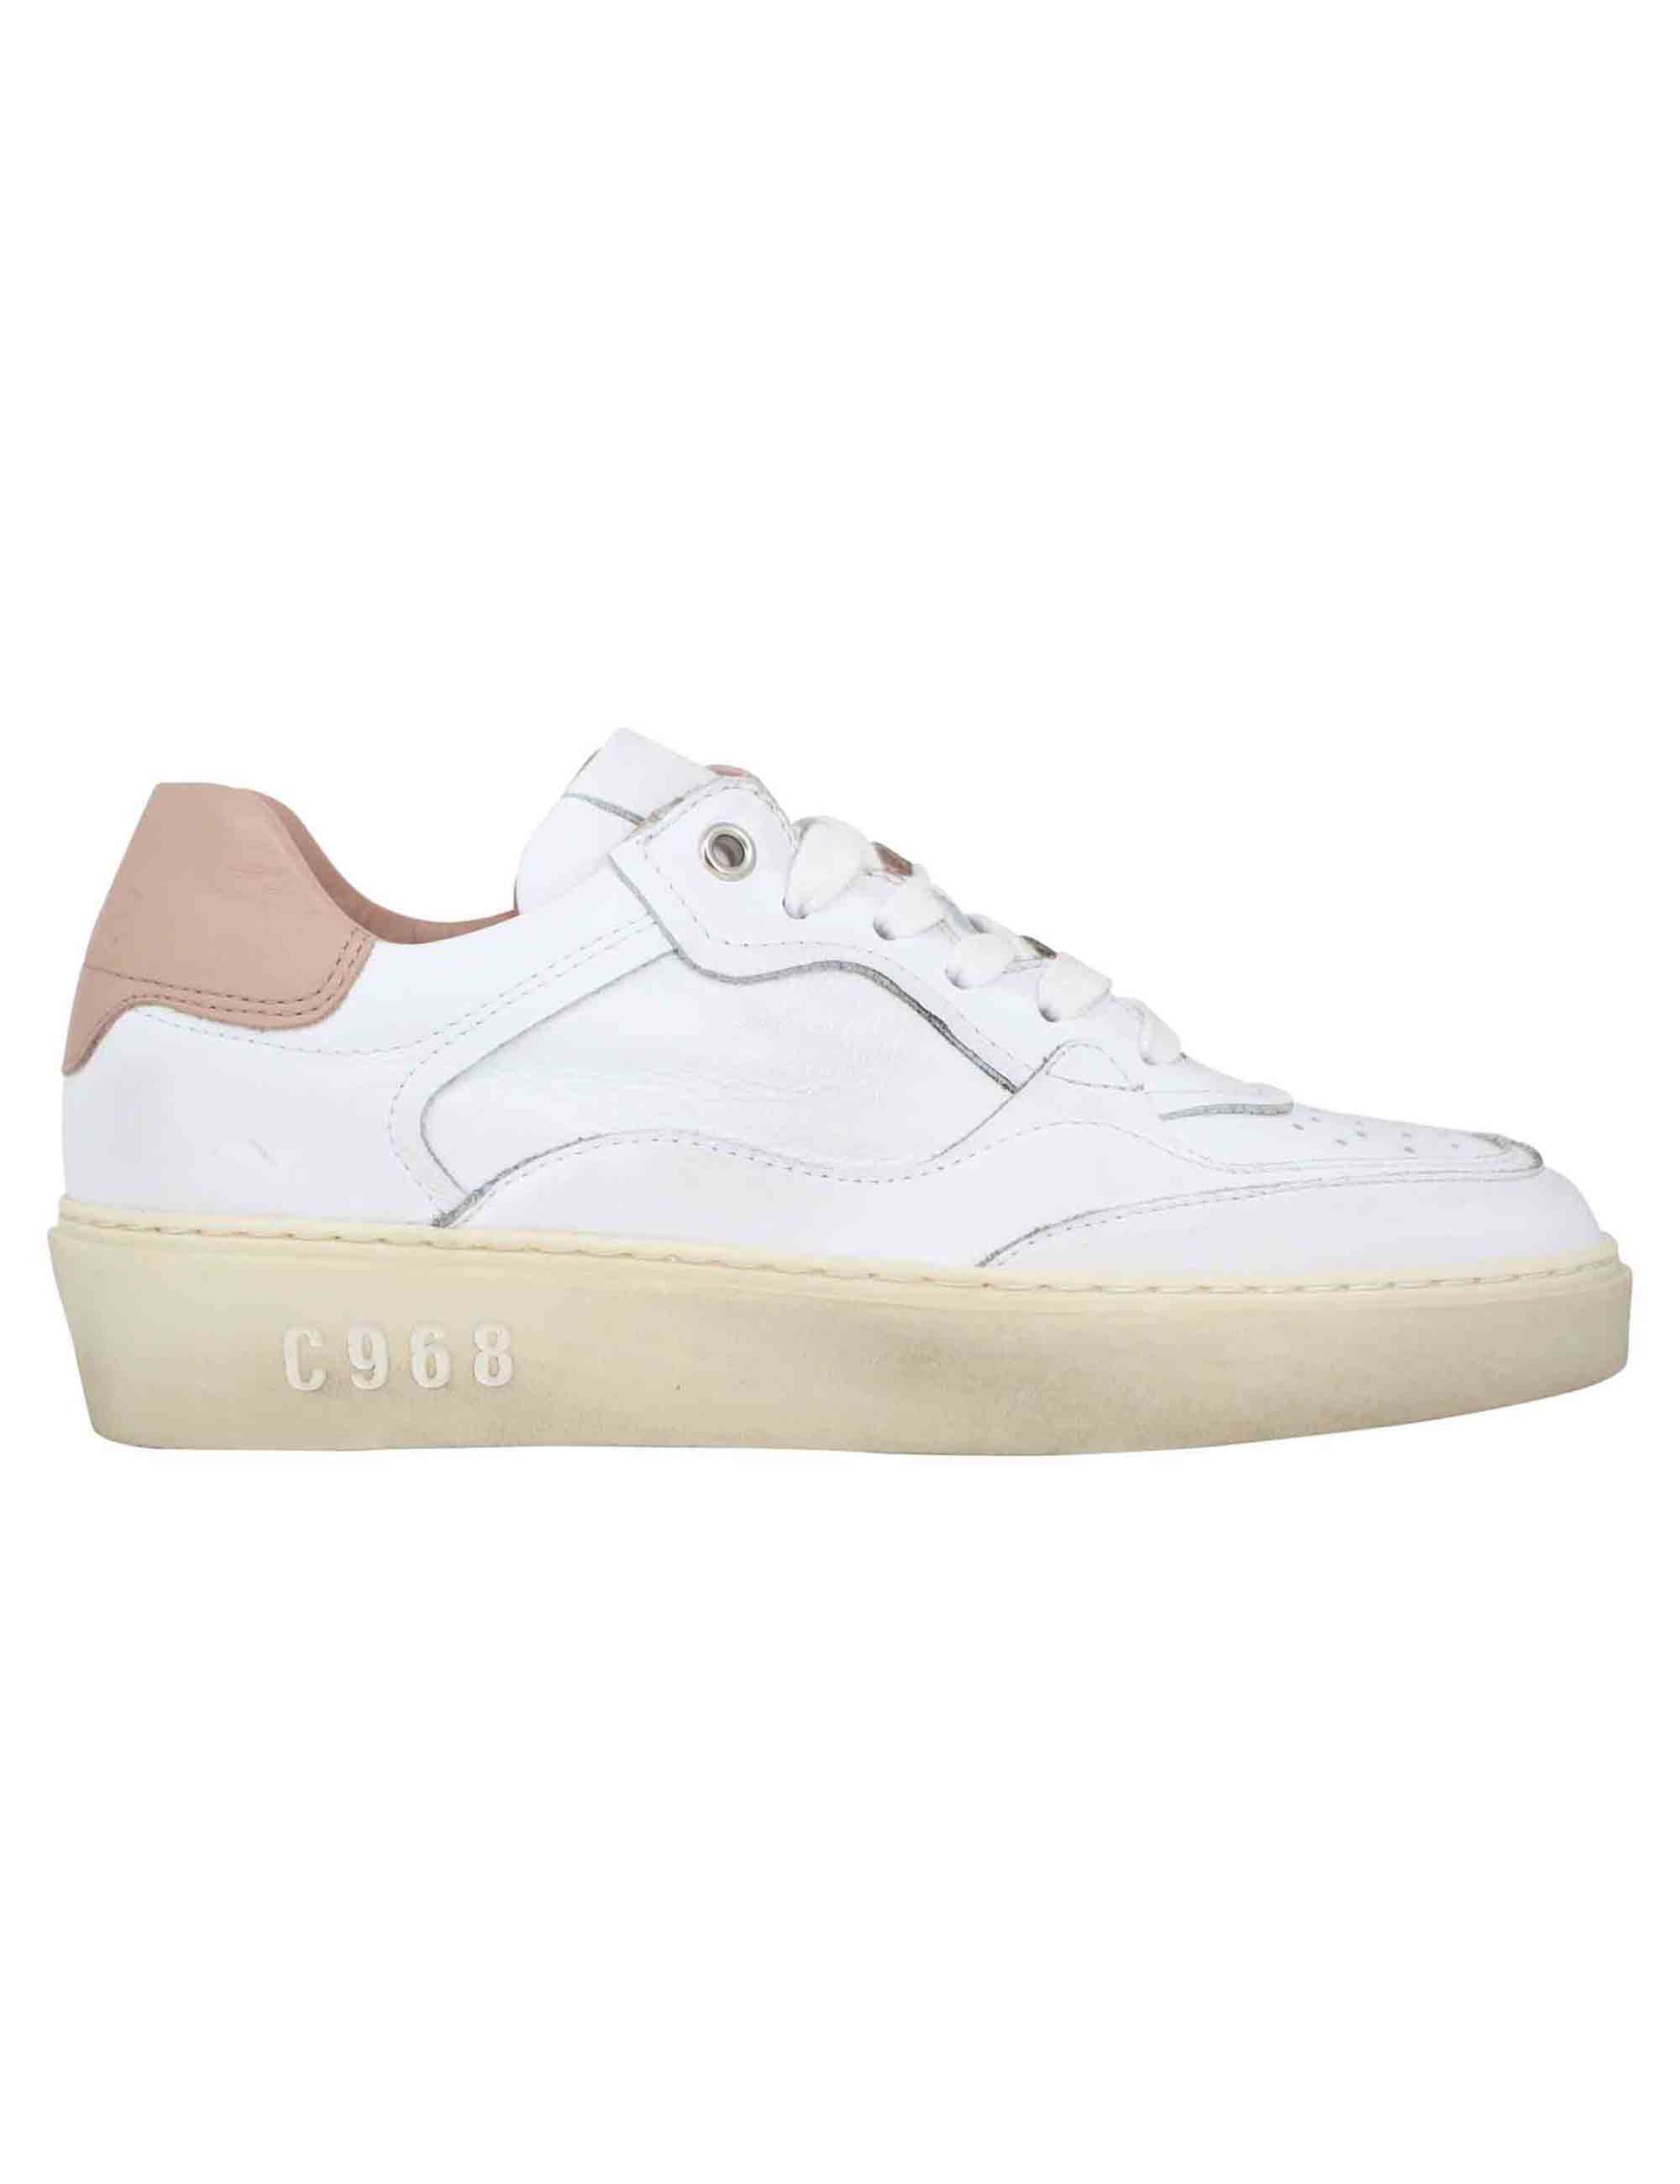 Women's white leather sneakers